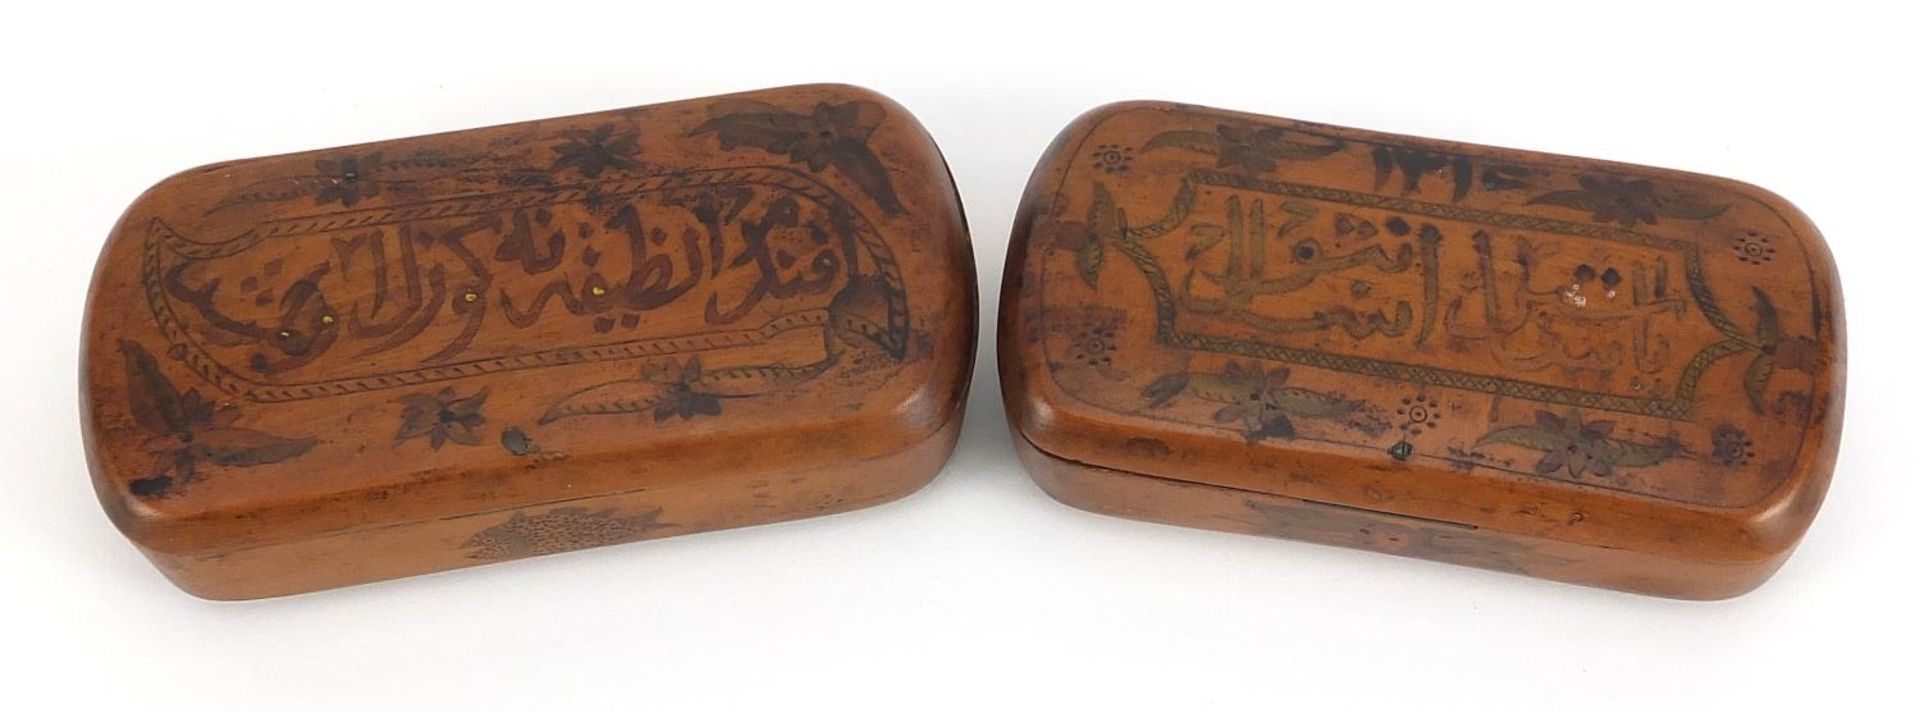 Pair of Islamic treen snuff boxes with calligraphy and flowers, each 11cm wide - Bild 2 aus 5